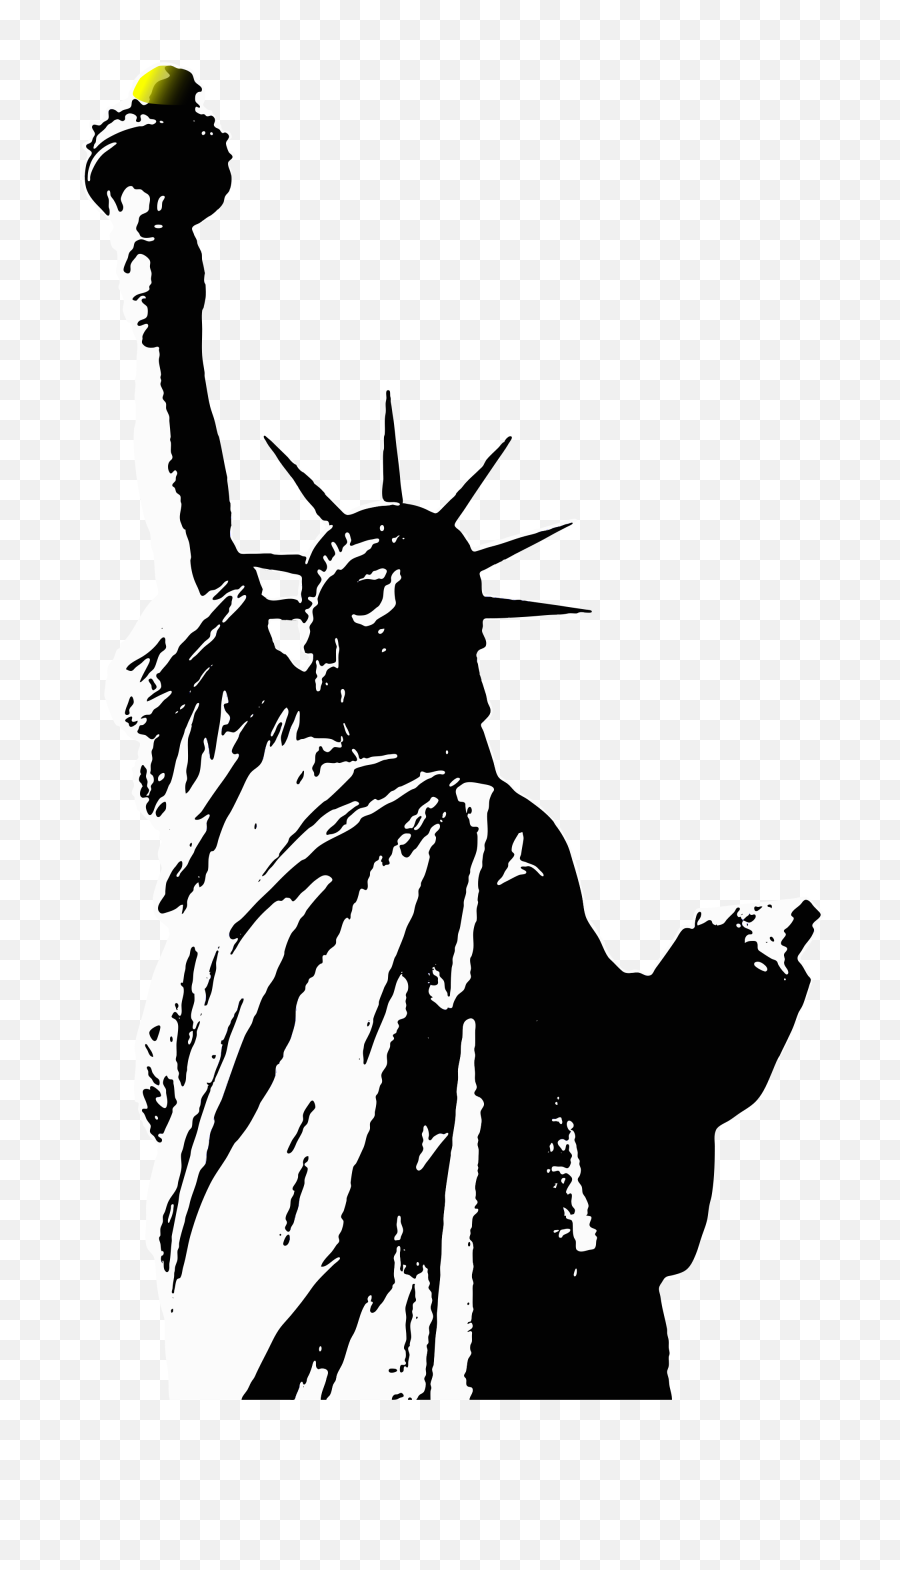 Statue Of Liberty Png Image - Statue Of Liberty National Monument,Statue Of Liberty Transparent